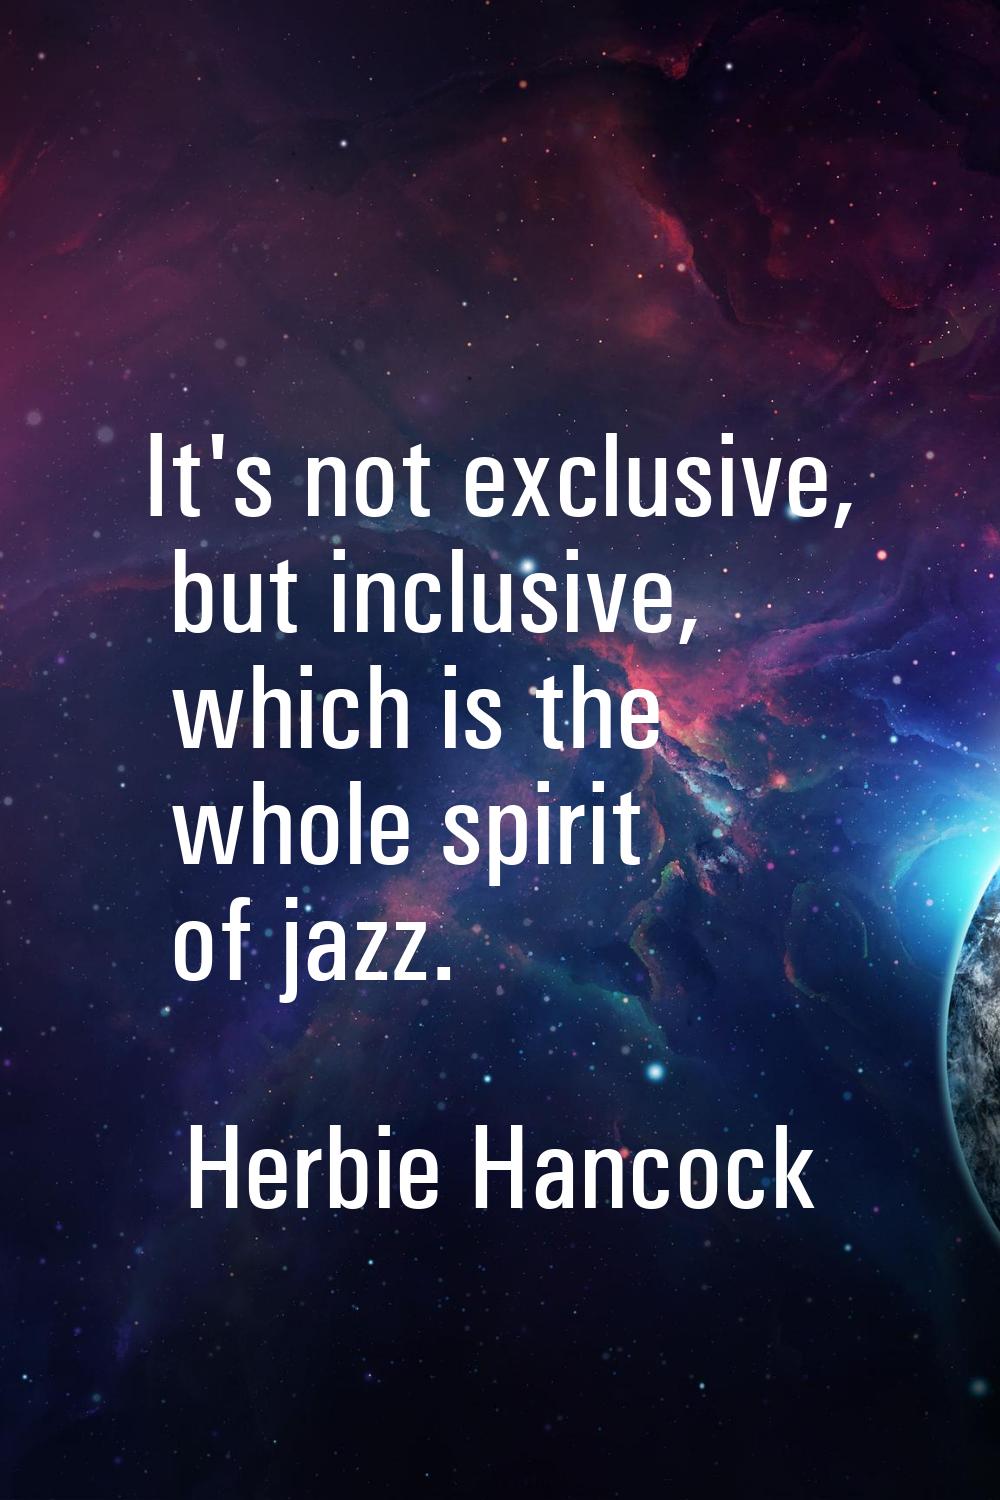 It's not exclusive, but inclusive, which is the whole spirit of jazz.